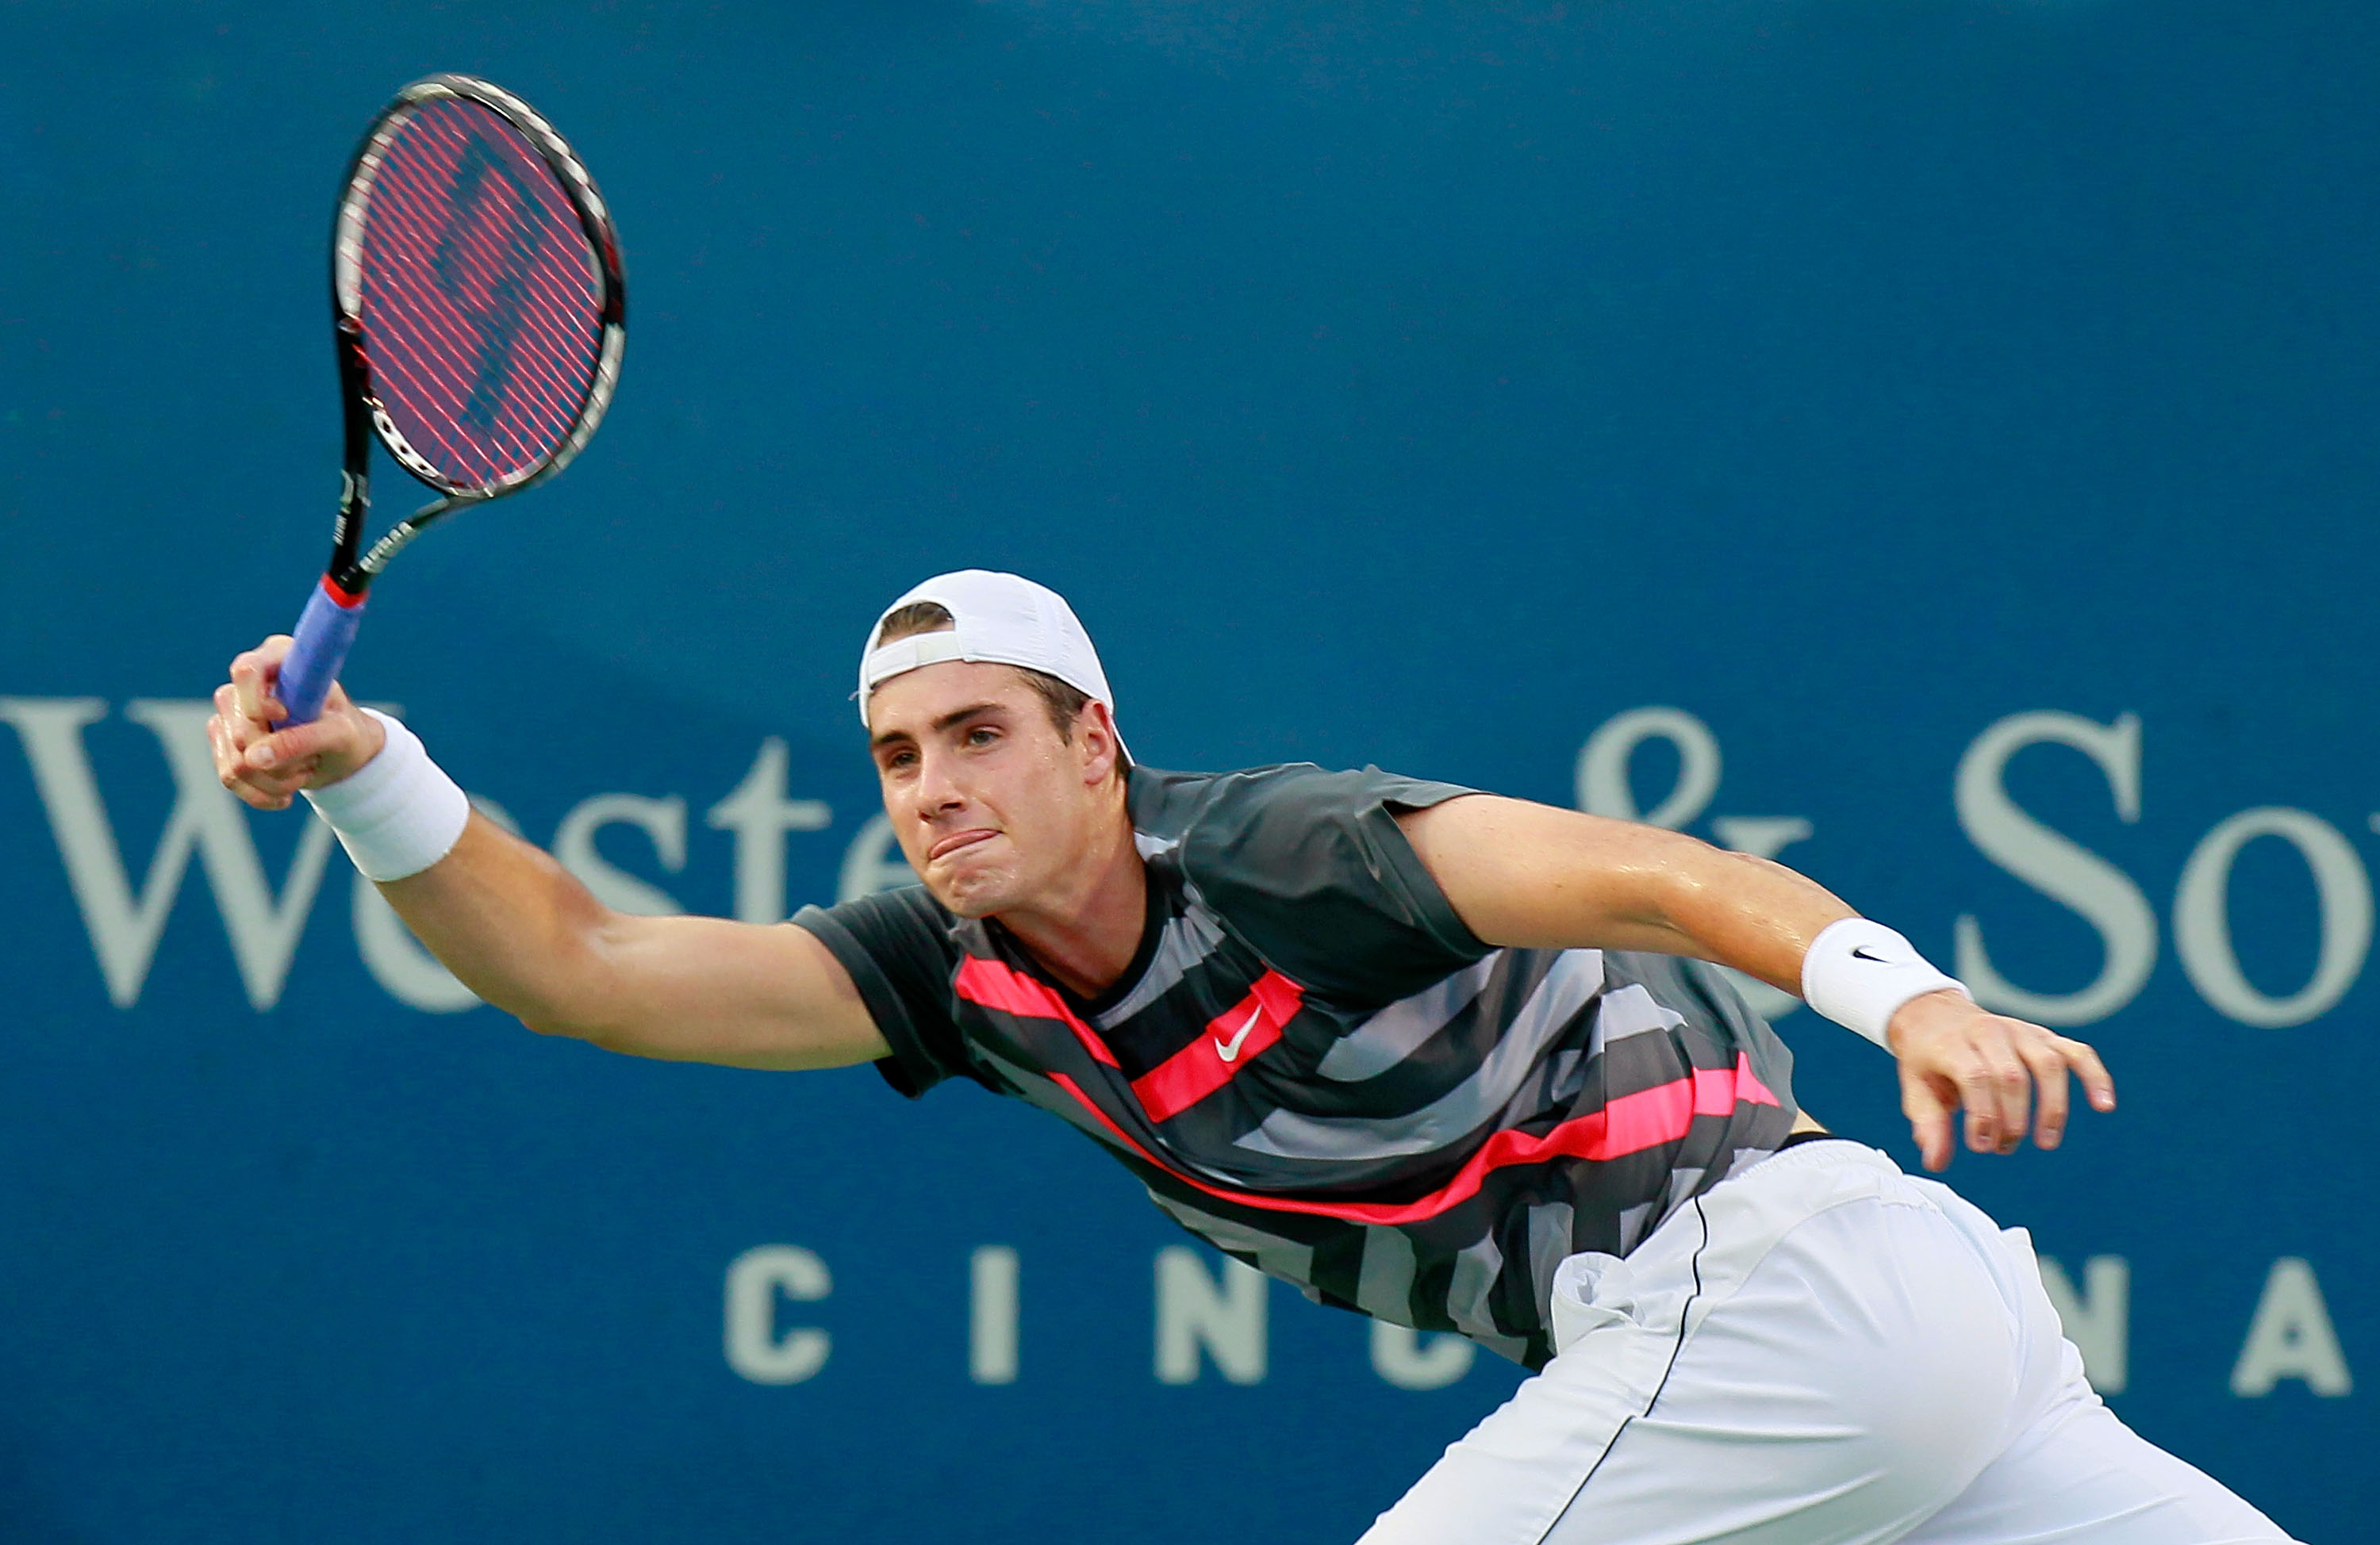 CINCINNATI - AUGUST 17:  John Isner returns a forehand to Lukasz Kubot of Poland during Day 2 of the Western & Southern Financial Group Masters at the Lindner Family Tennis Center on August 17, 2010 in Cincinnati, Ohio.  (Photo by Kevin C. Cox/Getty Image